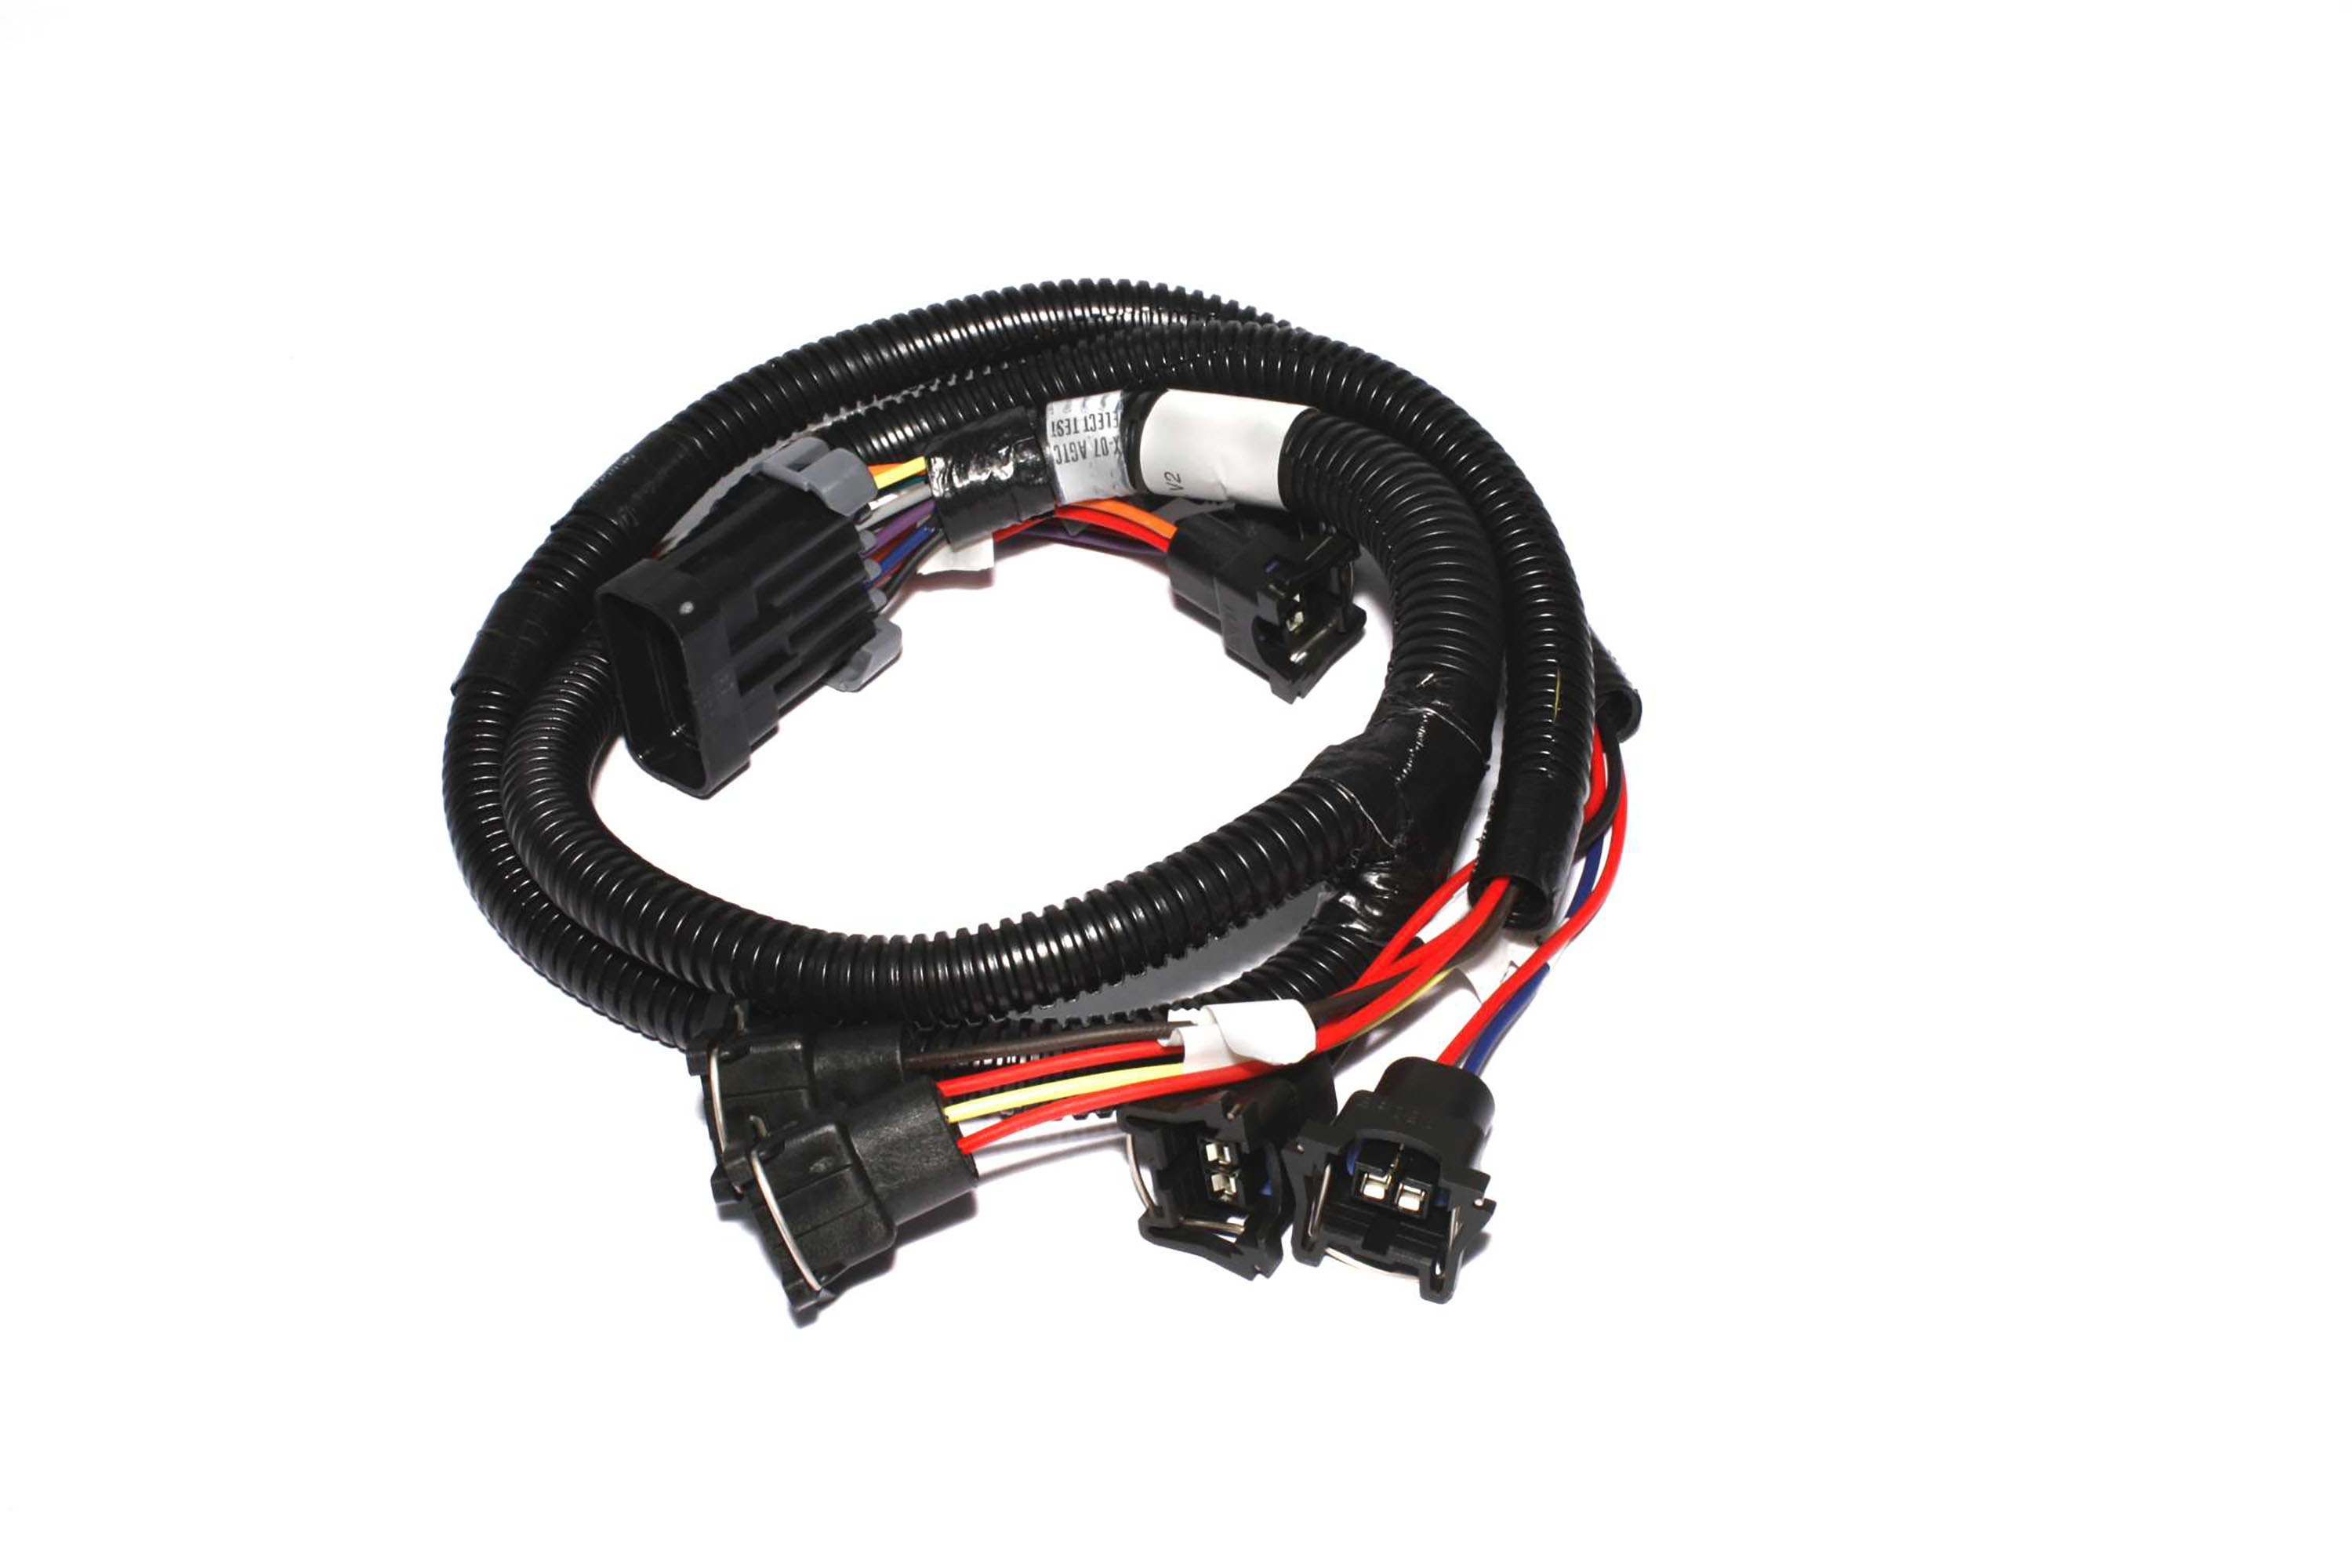 Chevrolet   XFI Fuel Injection Harness Mod